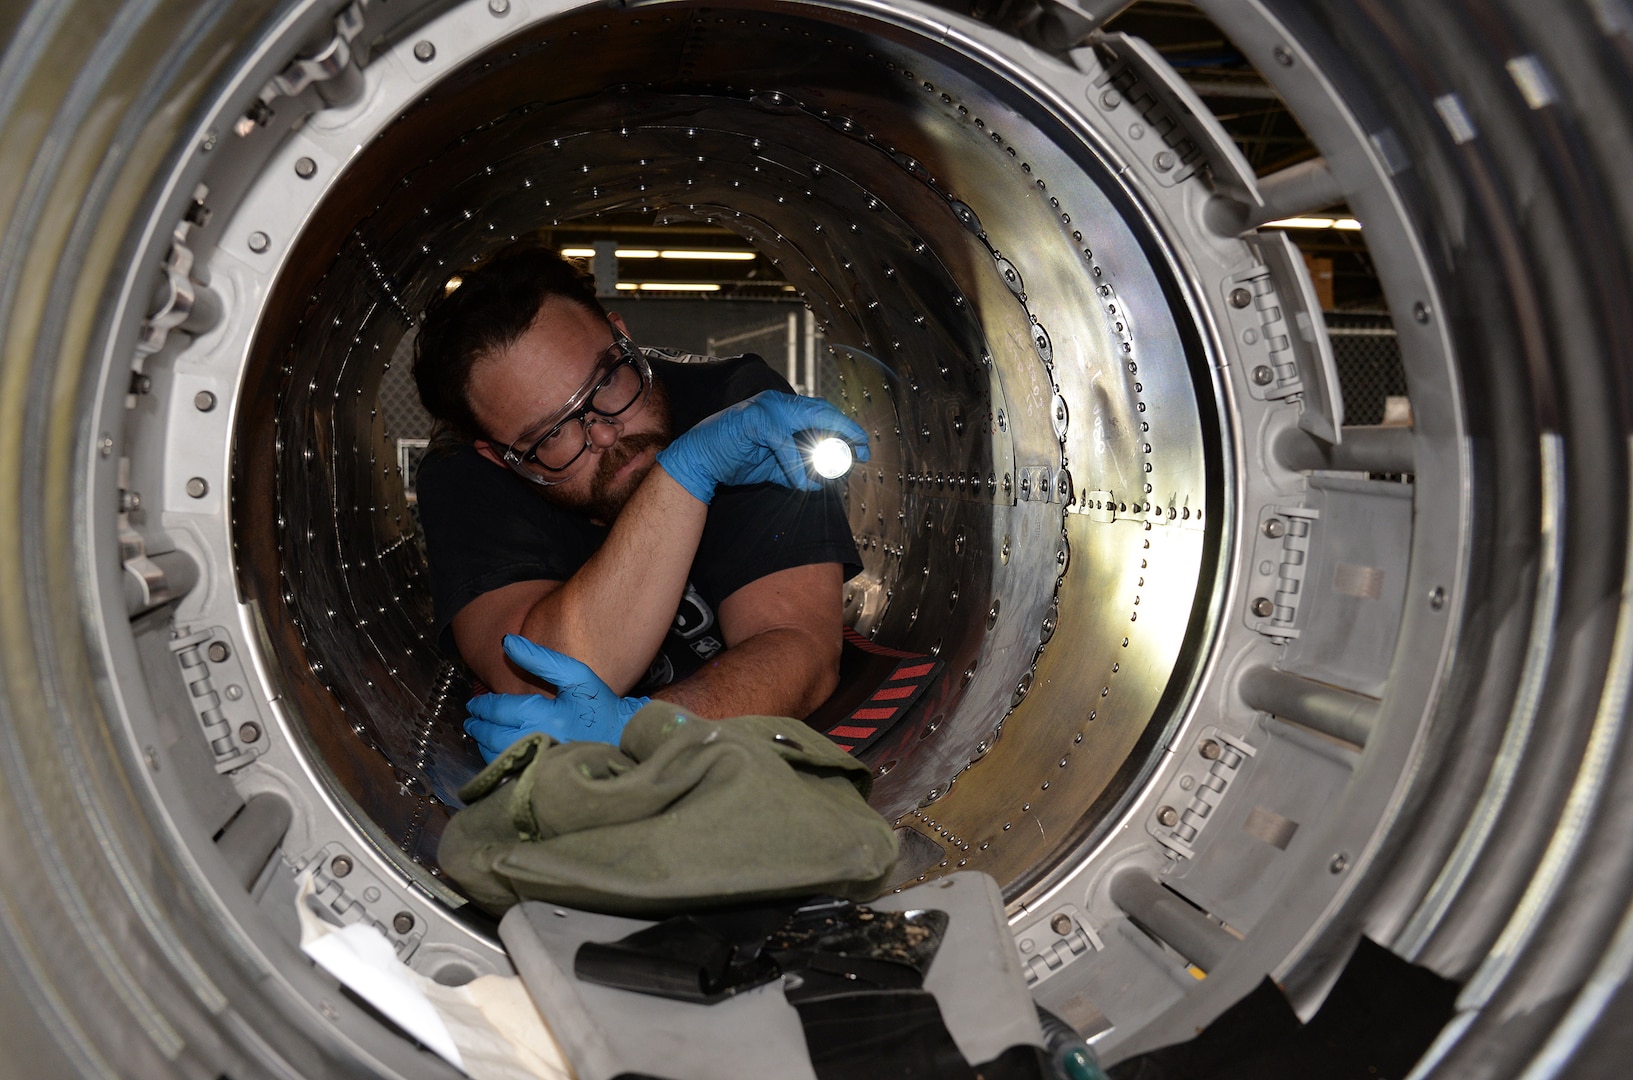 Jason Moore, 575th Aircraft Maintenance Squadron maintenance support flight, inspects the inside of T-38 Talon boat tail section April 17, 2018, at Joint Base San Antonio-Randolph, Texas. (U.S. Air Force photo by Alex R. Lloyd)